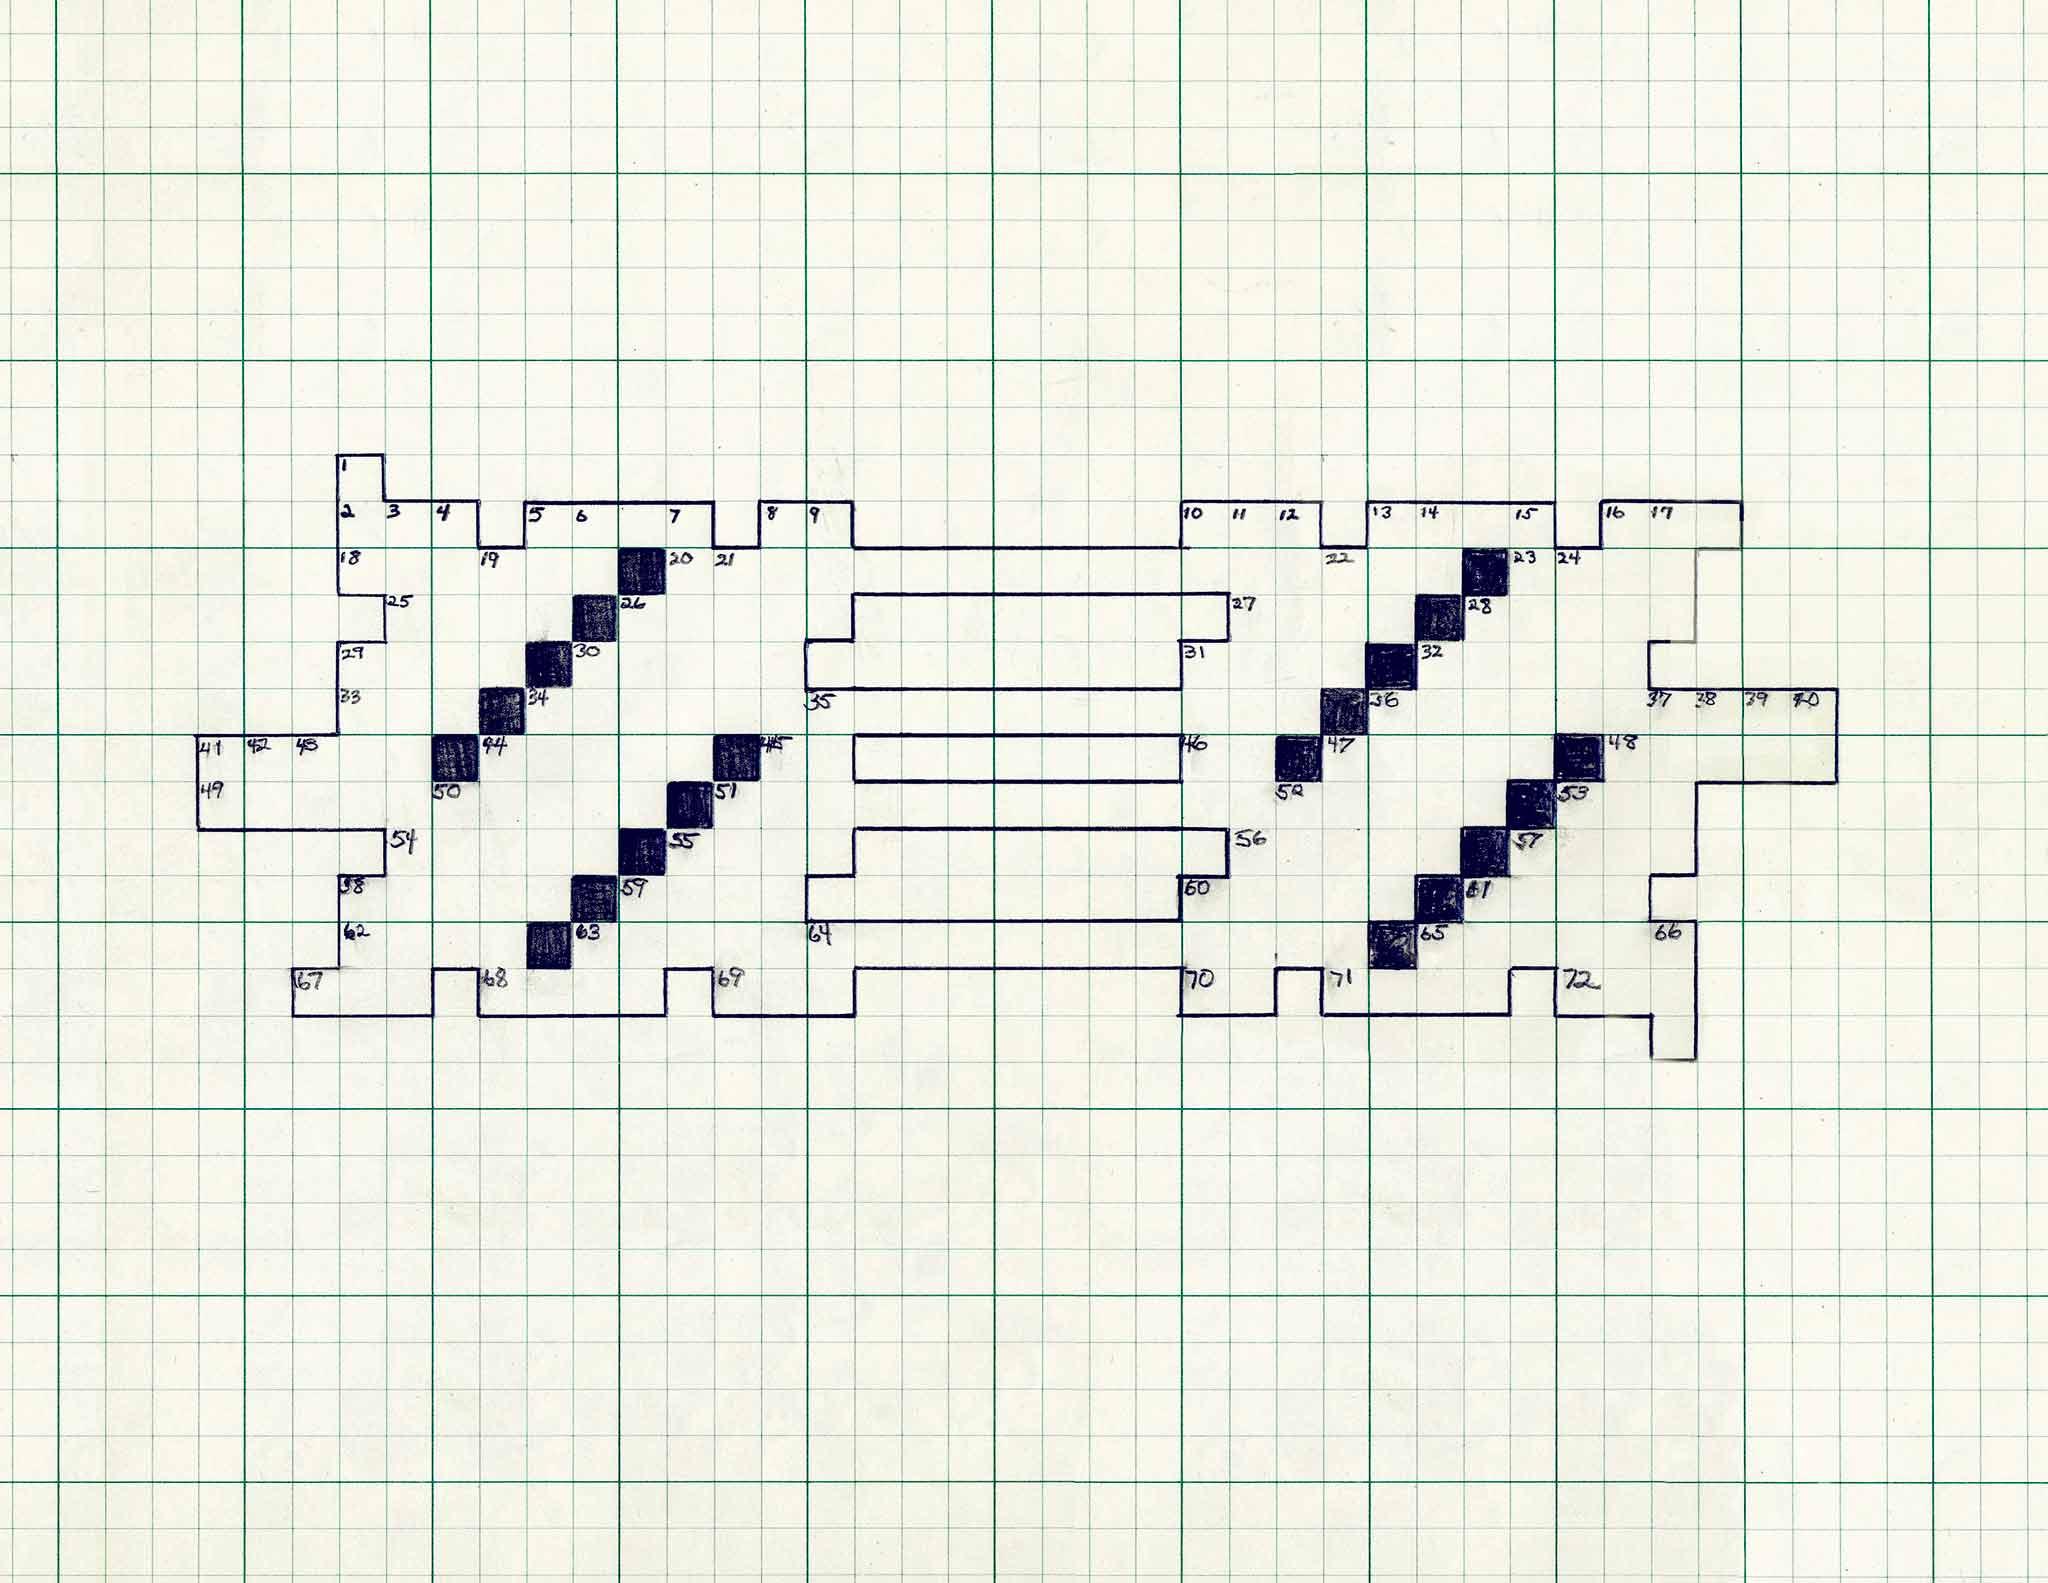 A Concrete Poem in the form of a crossword puzzle.